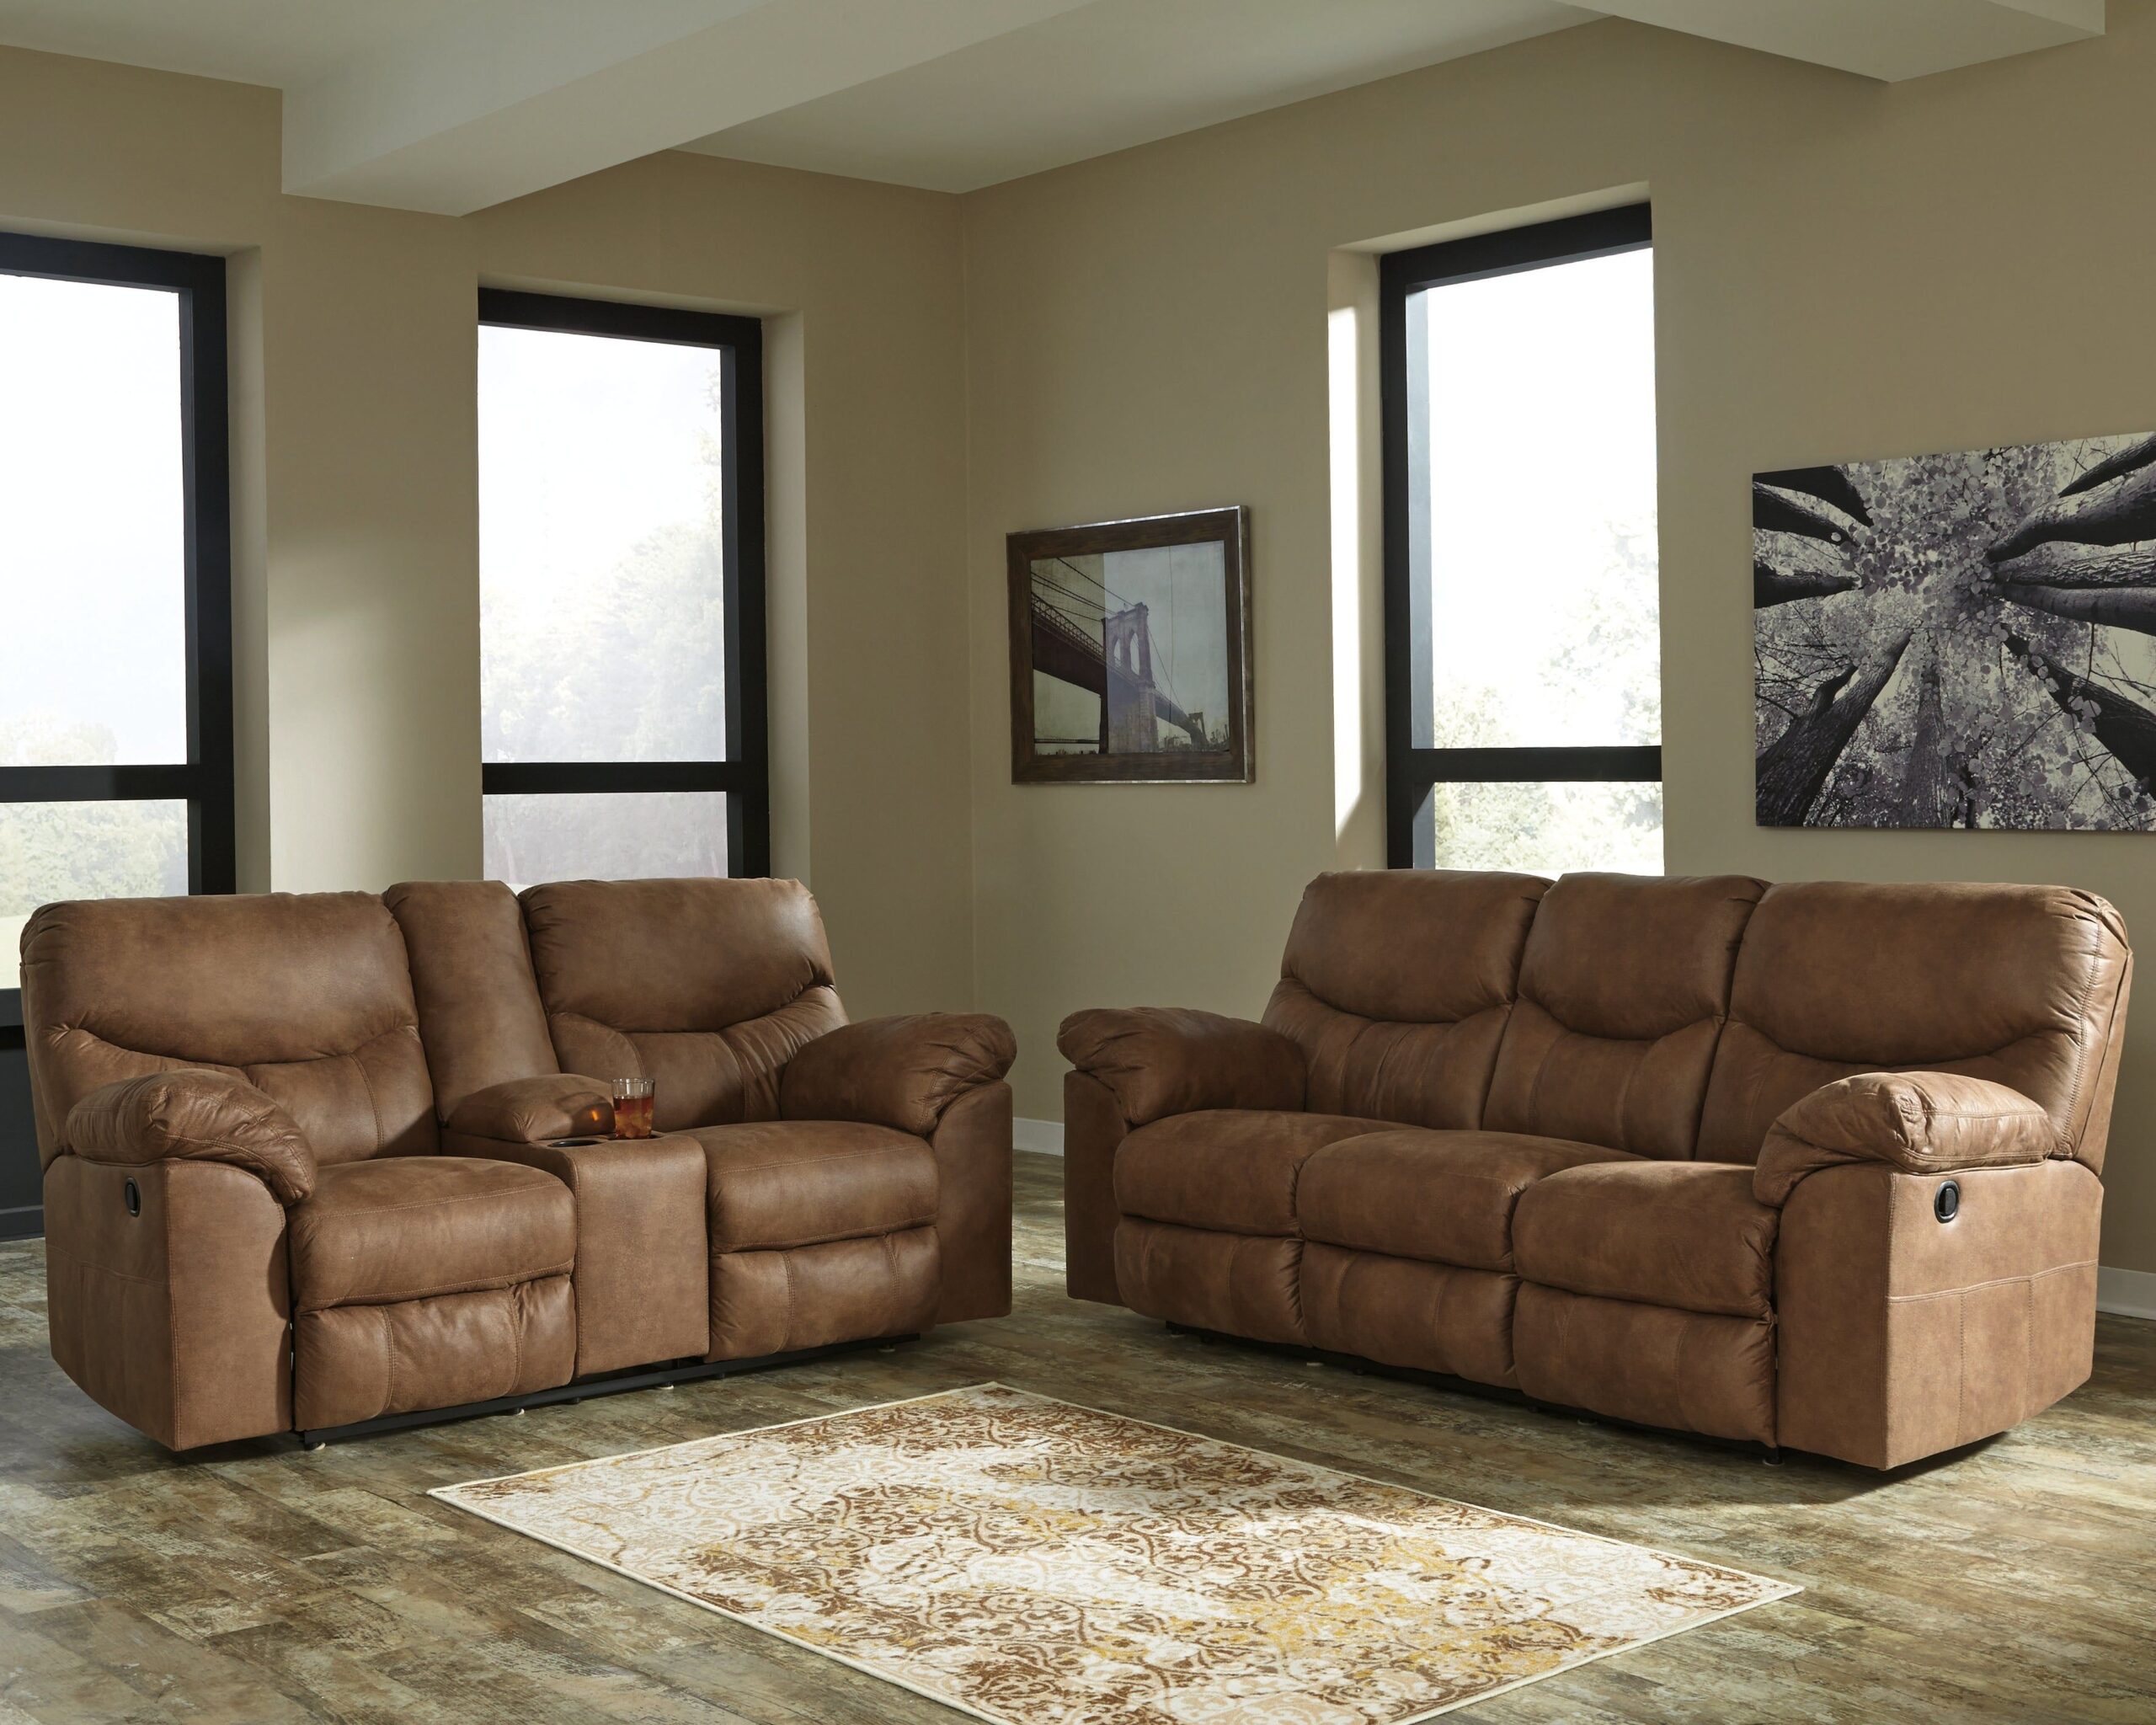 The Comfort of a Double Reclining Loveseat